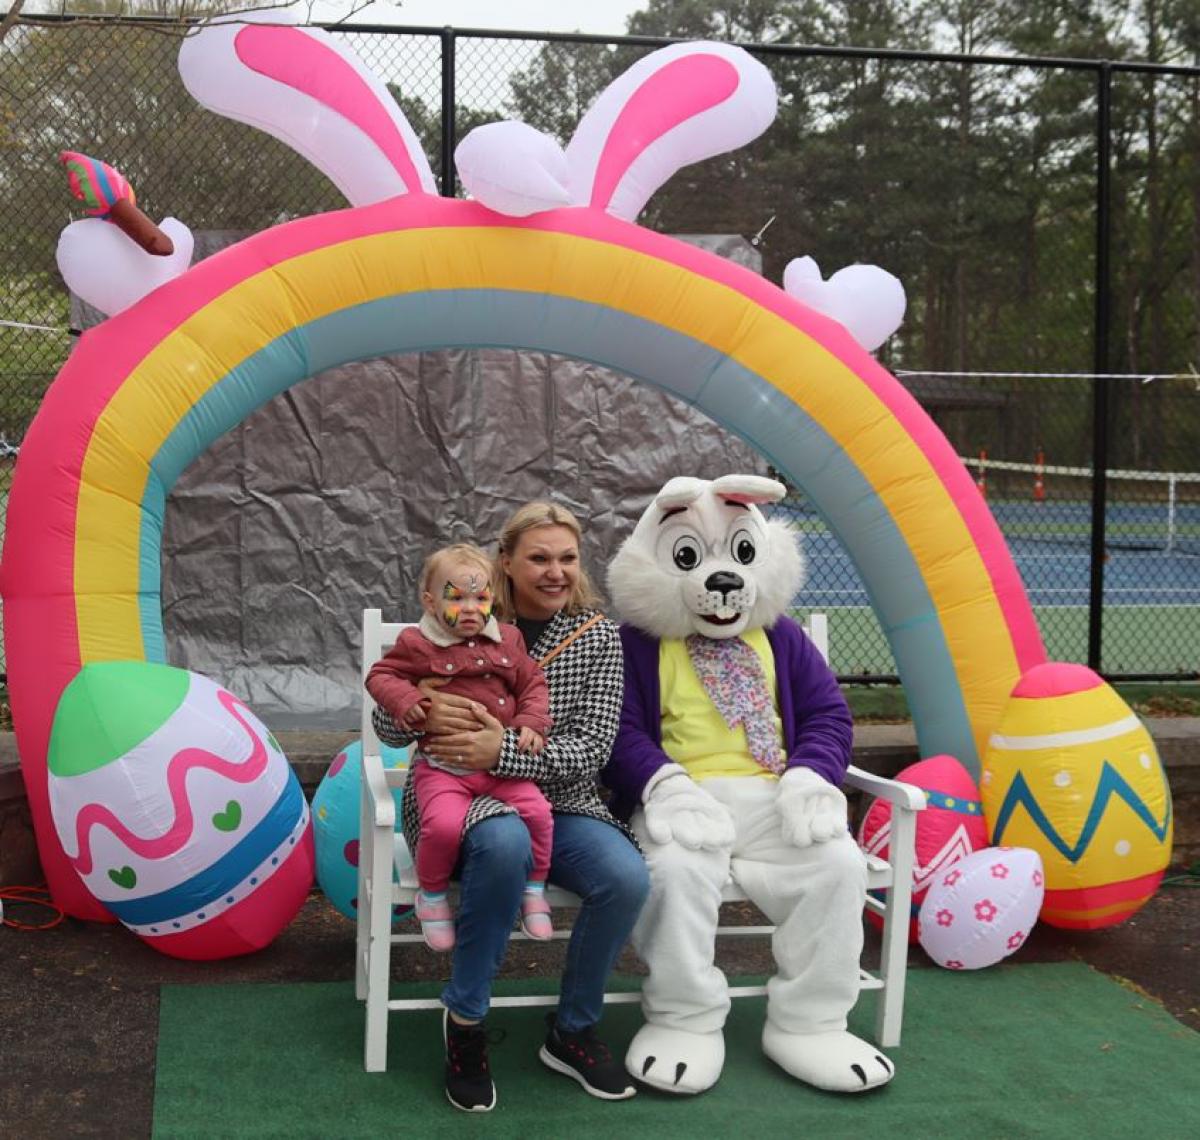 Peter Rabbit will attend all Easter Egg hunts at Blackburn Park to pose for photos Brookhaven April 1st.